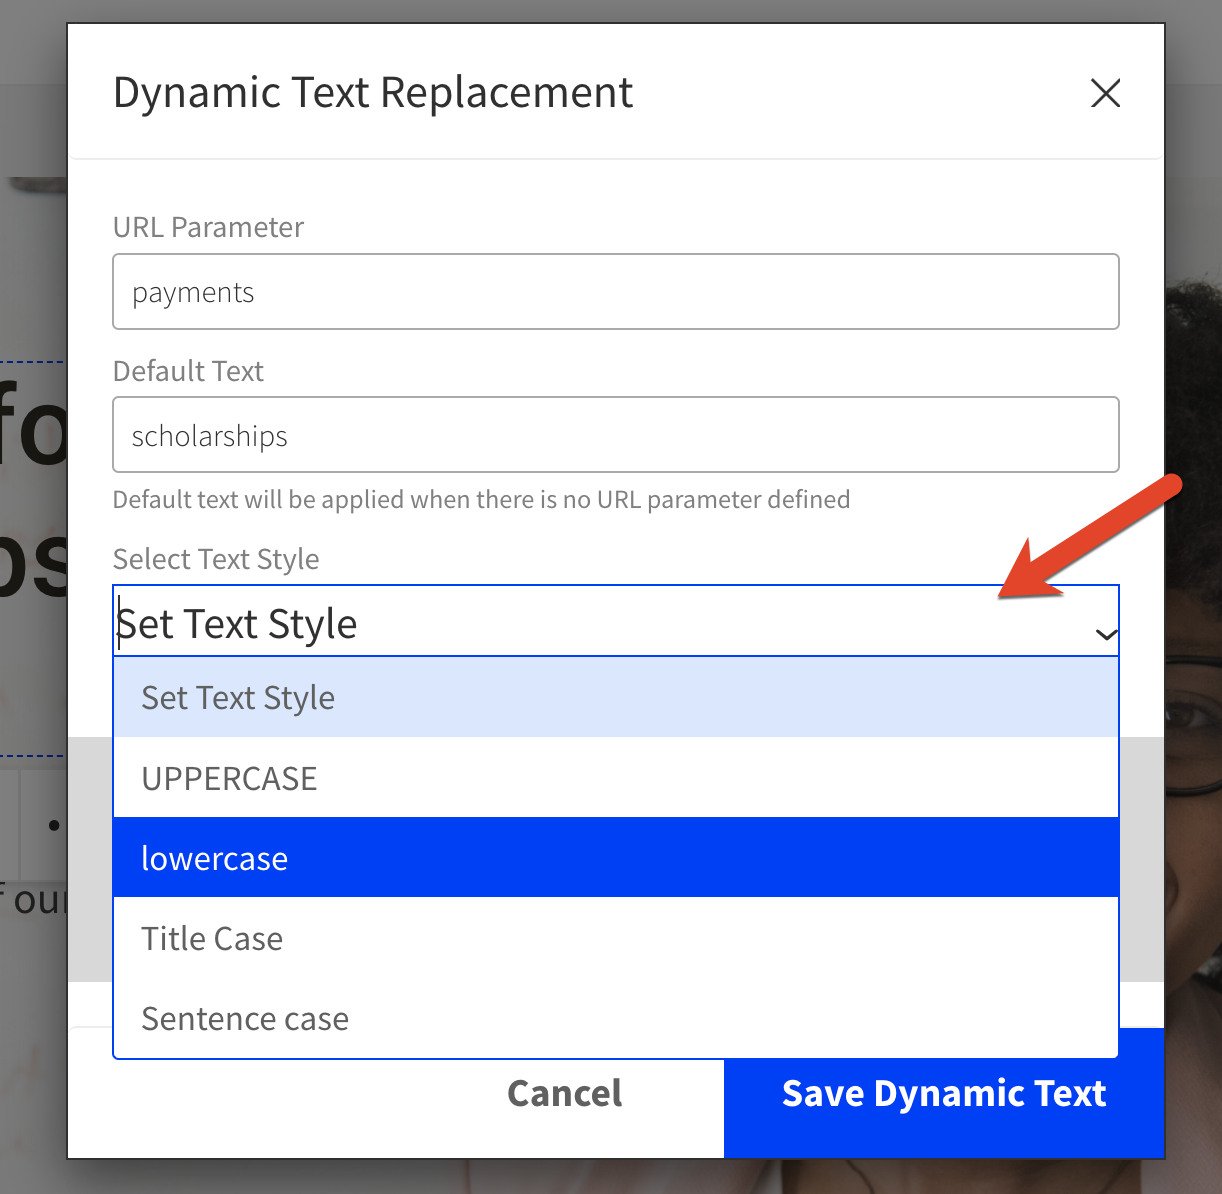 Choose text style from drop-down menu.